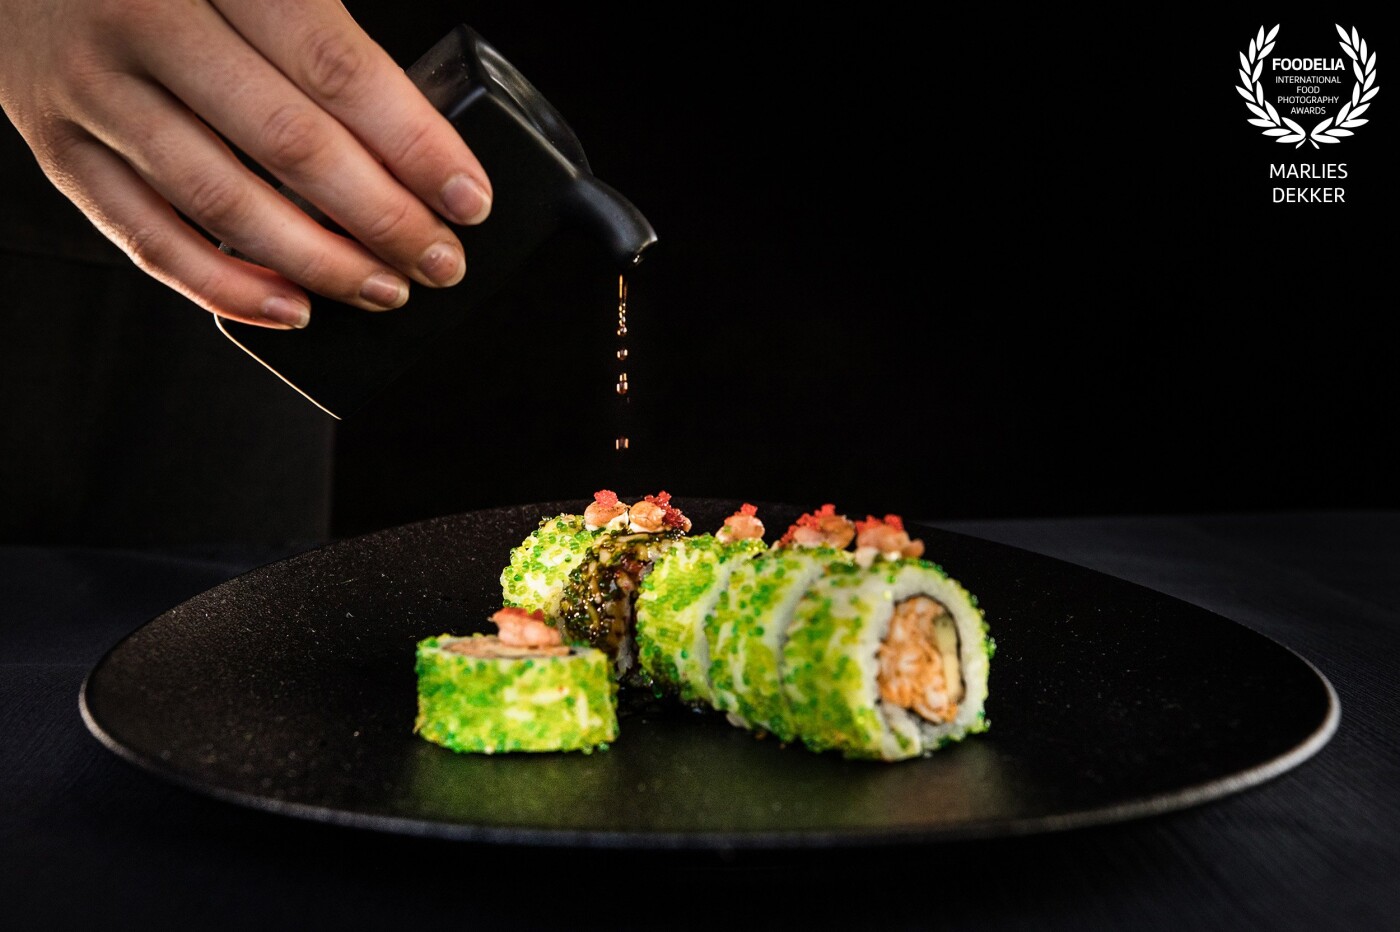 As a real sushi lover, the Saturday night sushi was my friend again. I used a simple background (black cotton) and added some flashlights to put the sushi and the sauce in the spotlight.